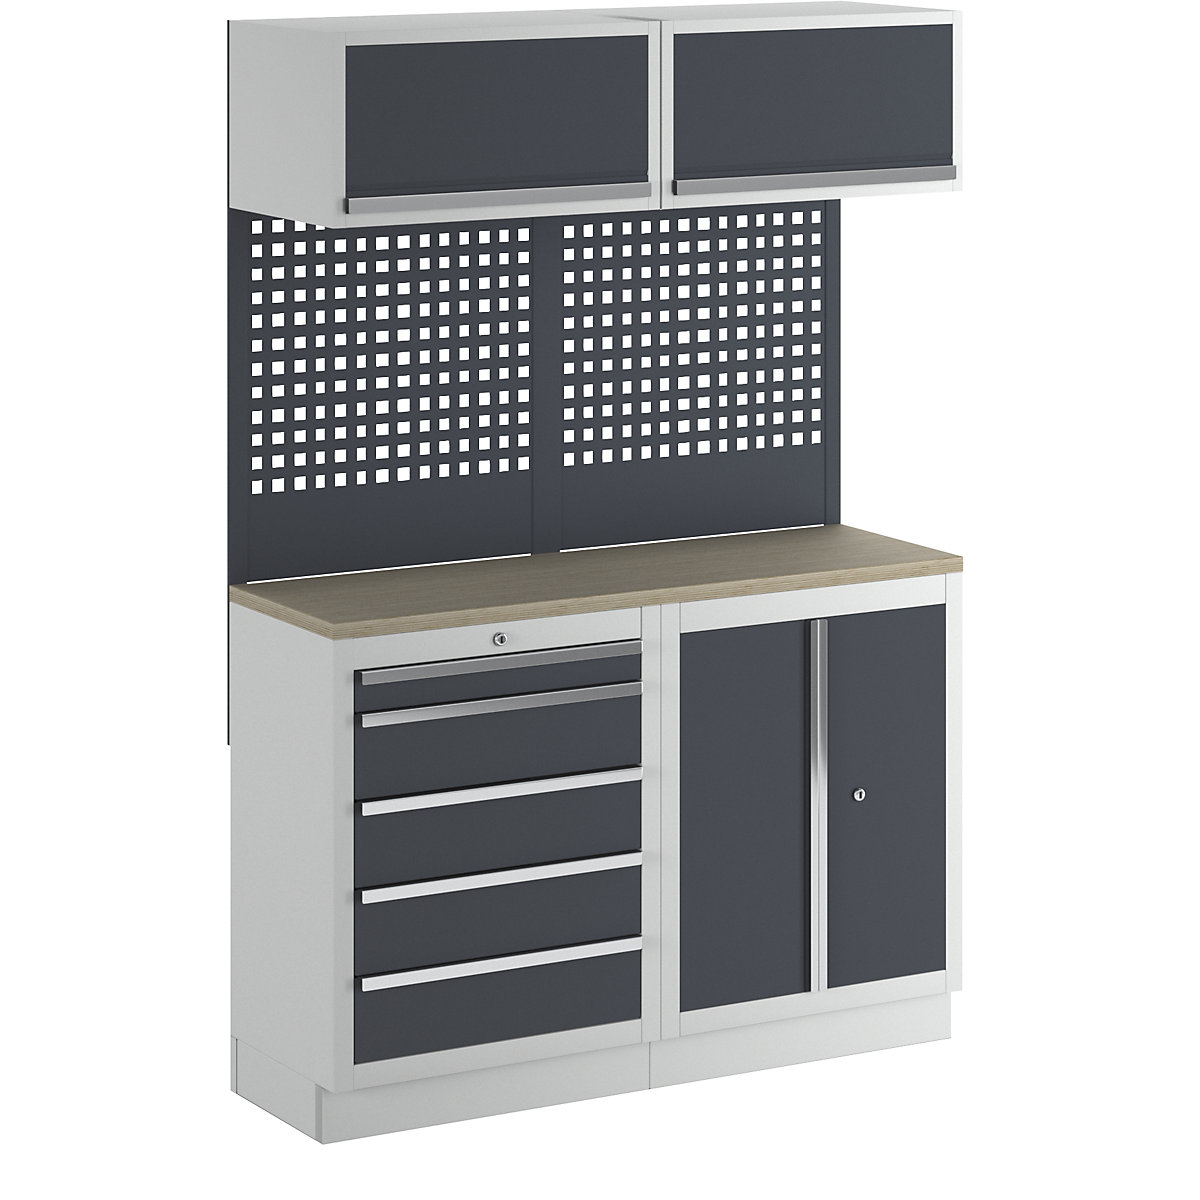 Workshop cupboard system with hinged door and drawer base cupboard